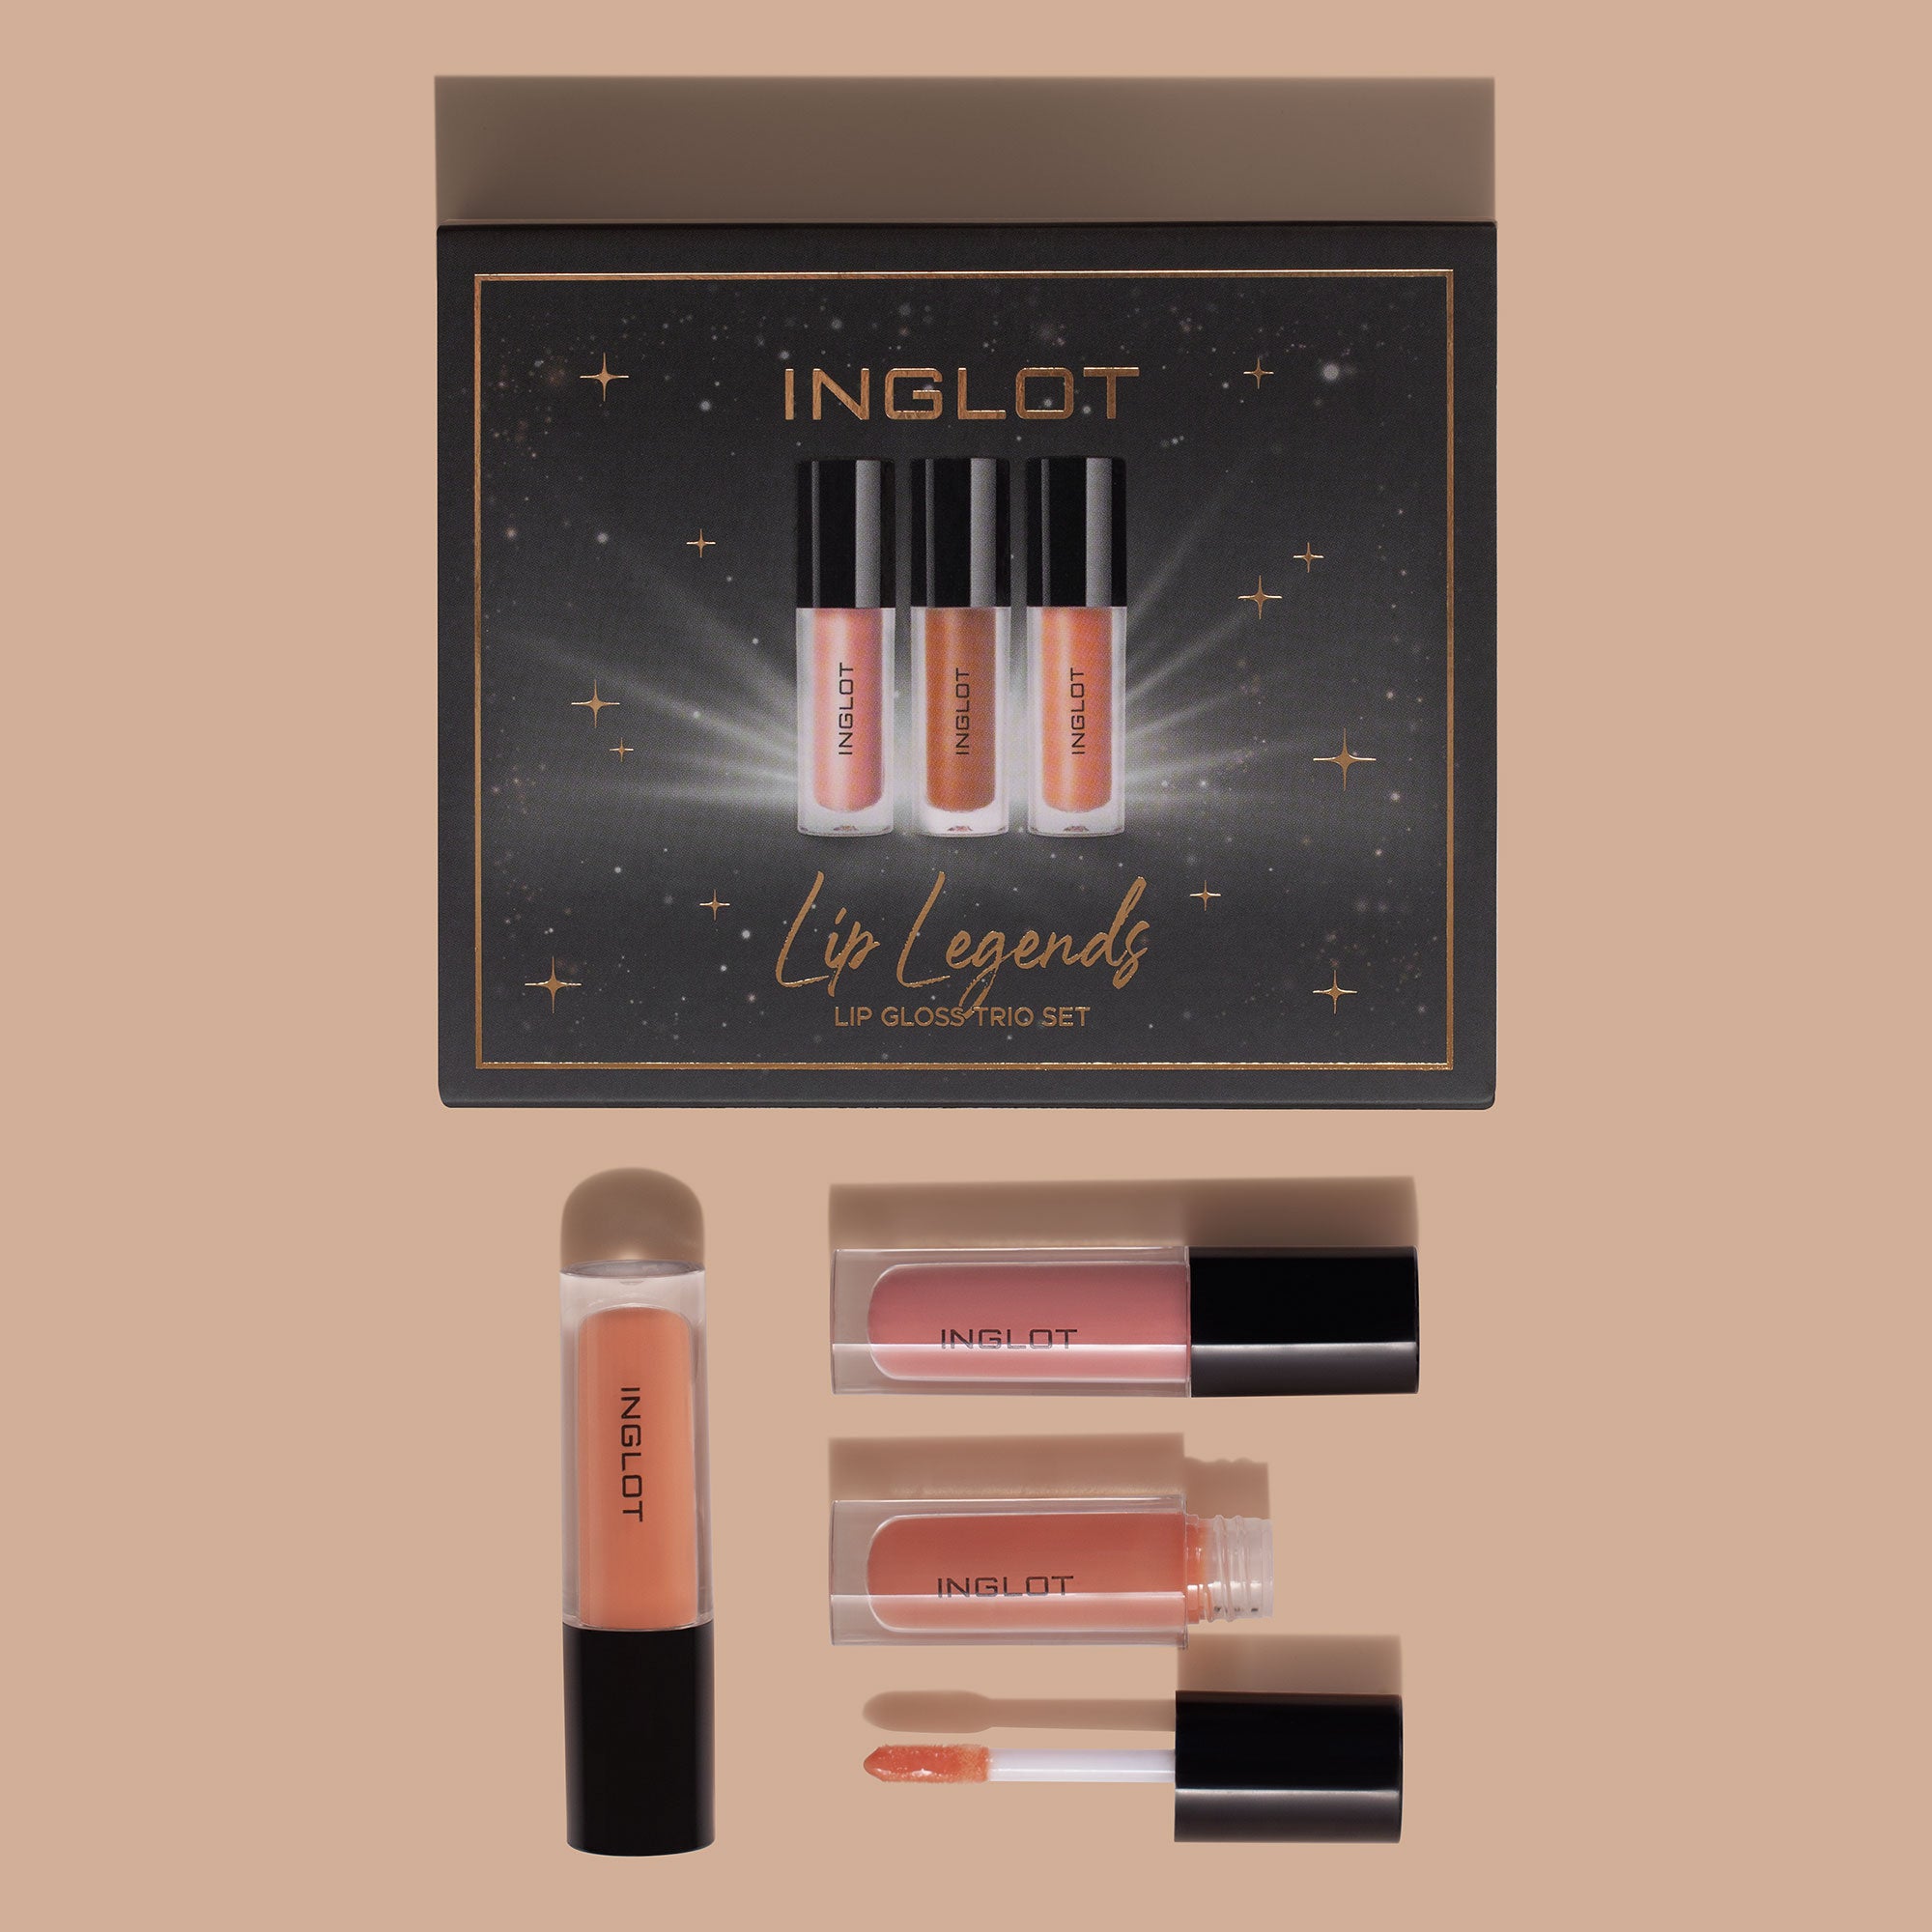 Inglot Lip Legends Mini Lip Gloss Trio Gift Set, with products open